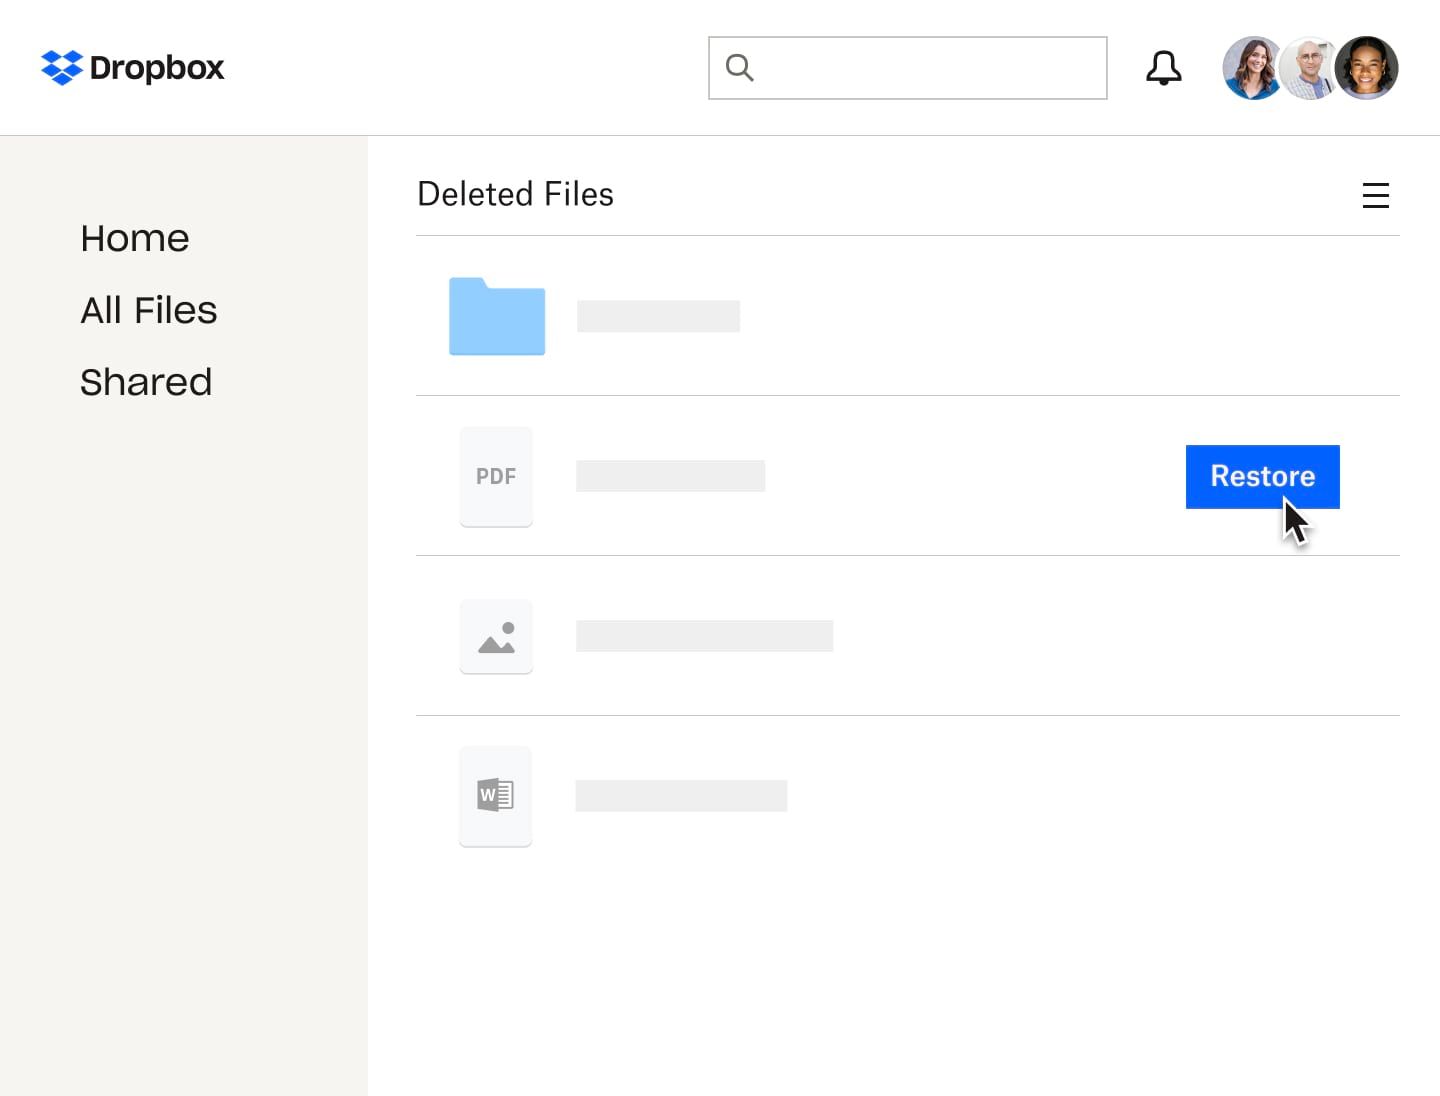 User restoring a deleted PDF in Dropbox